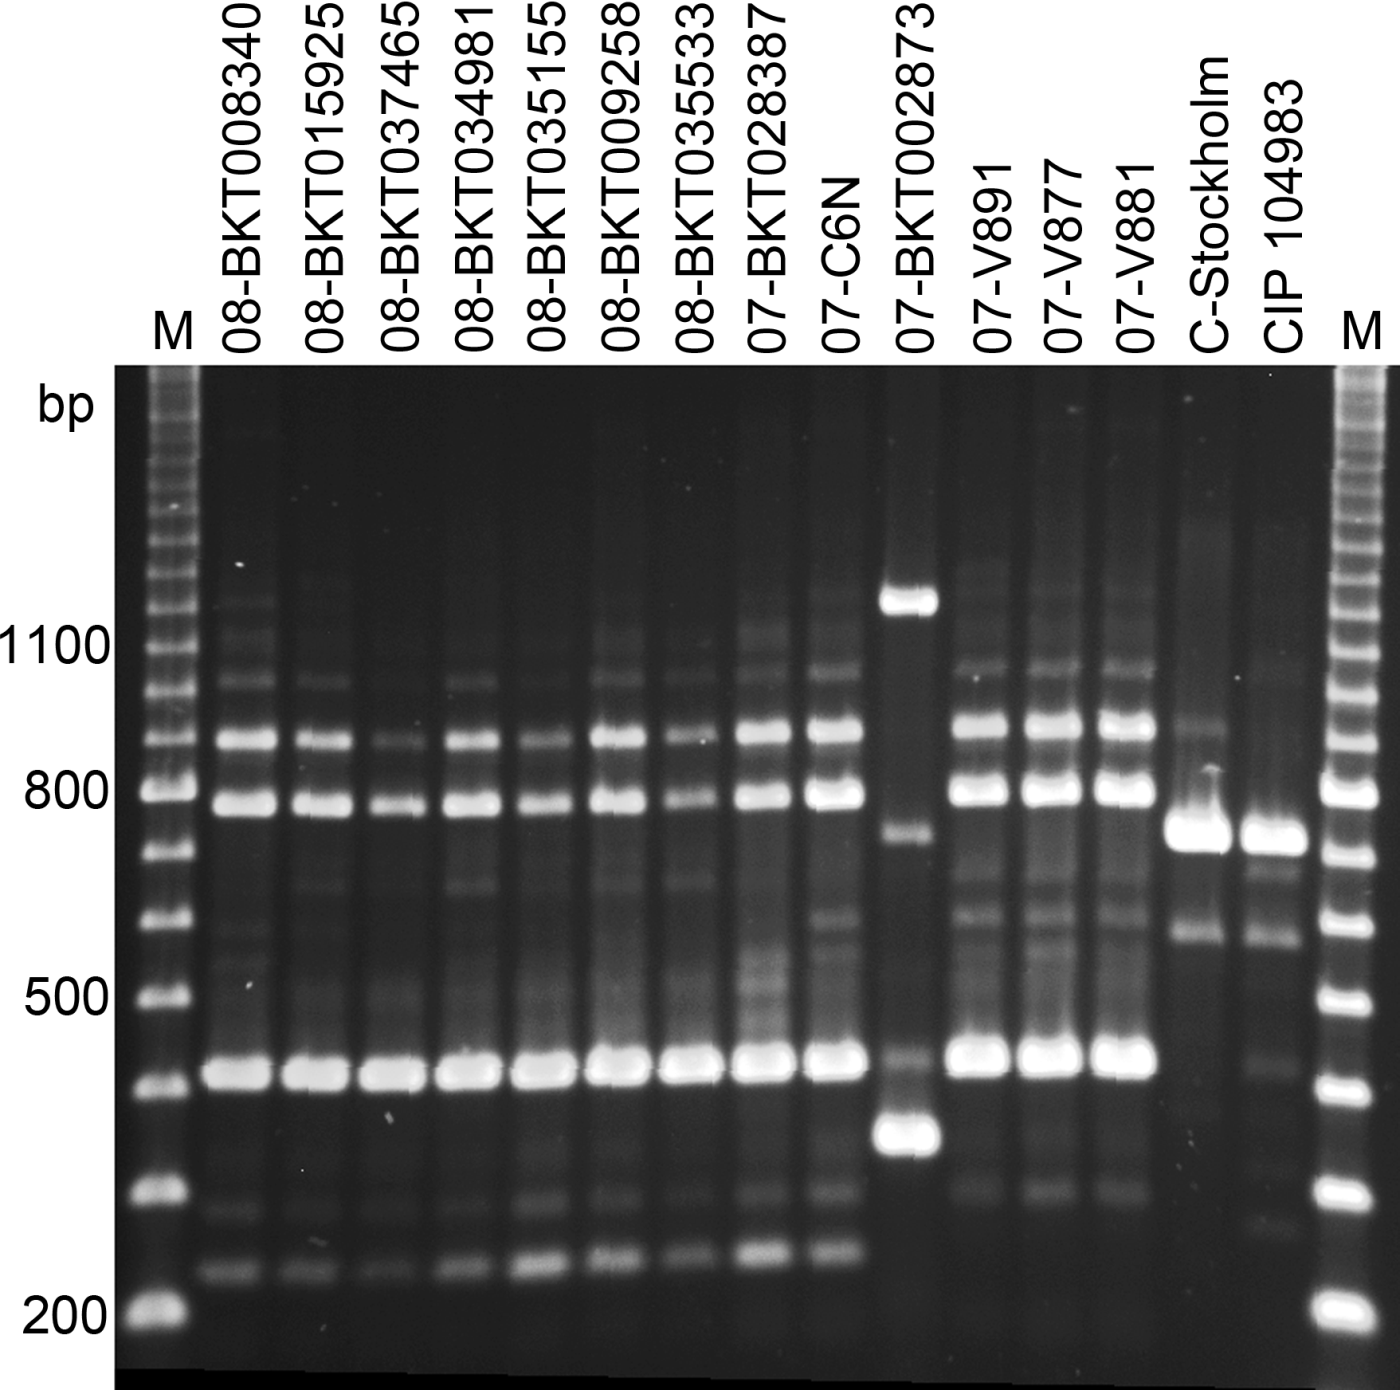 Figure 4.  Random-amplified polymorphic-DNA analysis patterns of 15 strains of C. botulinum type C after amplification by primer two (GE Healthcare, Little Chalfont, UK). Lanes 1 to 7, Swedish broiler isolates from 2008; lanes 8 and 10, Swedish broiler isolates from 2007; lane 9, a Norwegian broiler isolate from 2007; lanes 11 to 13, isolates from herring gulls; and lanes 14 and 15, reference strains C-Stockholm and CIP 108943. The outermost lanes are the 100 kb marker (M).